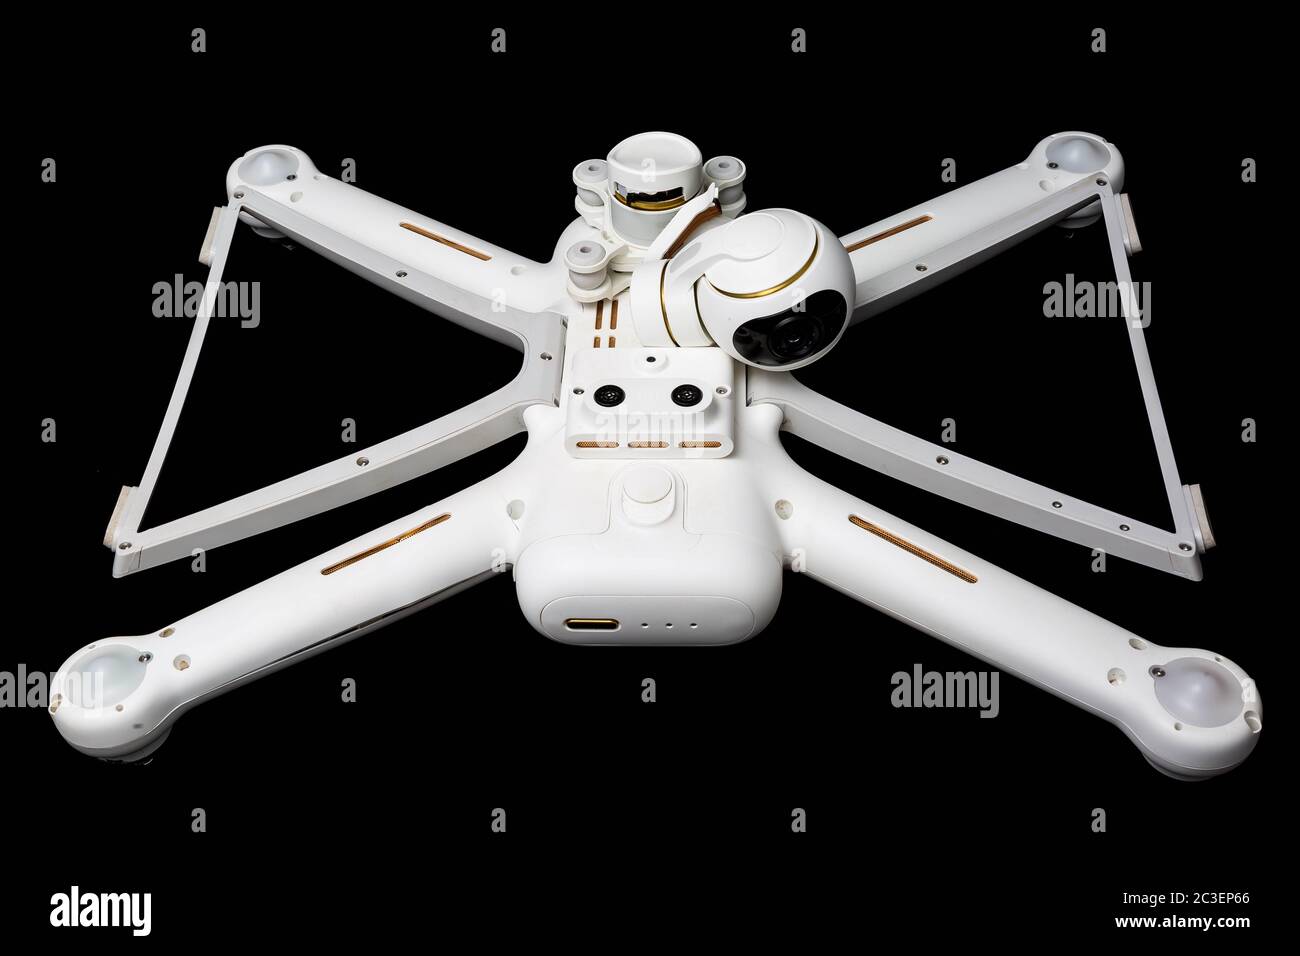 Moscow, Russia - May 13, 2019: Broken white Xiaomi Mi drone 4k after a  fall. On a black background. Damaged body, motor and stabilizer camera  gimbal Stock Photo - Alamy